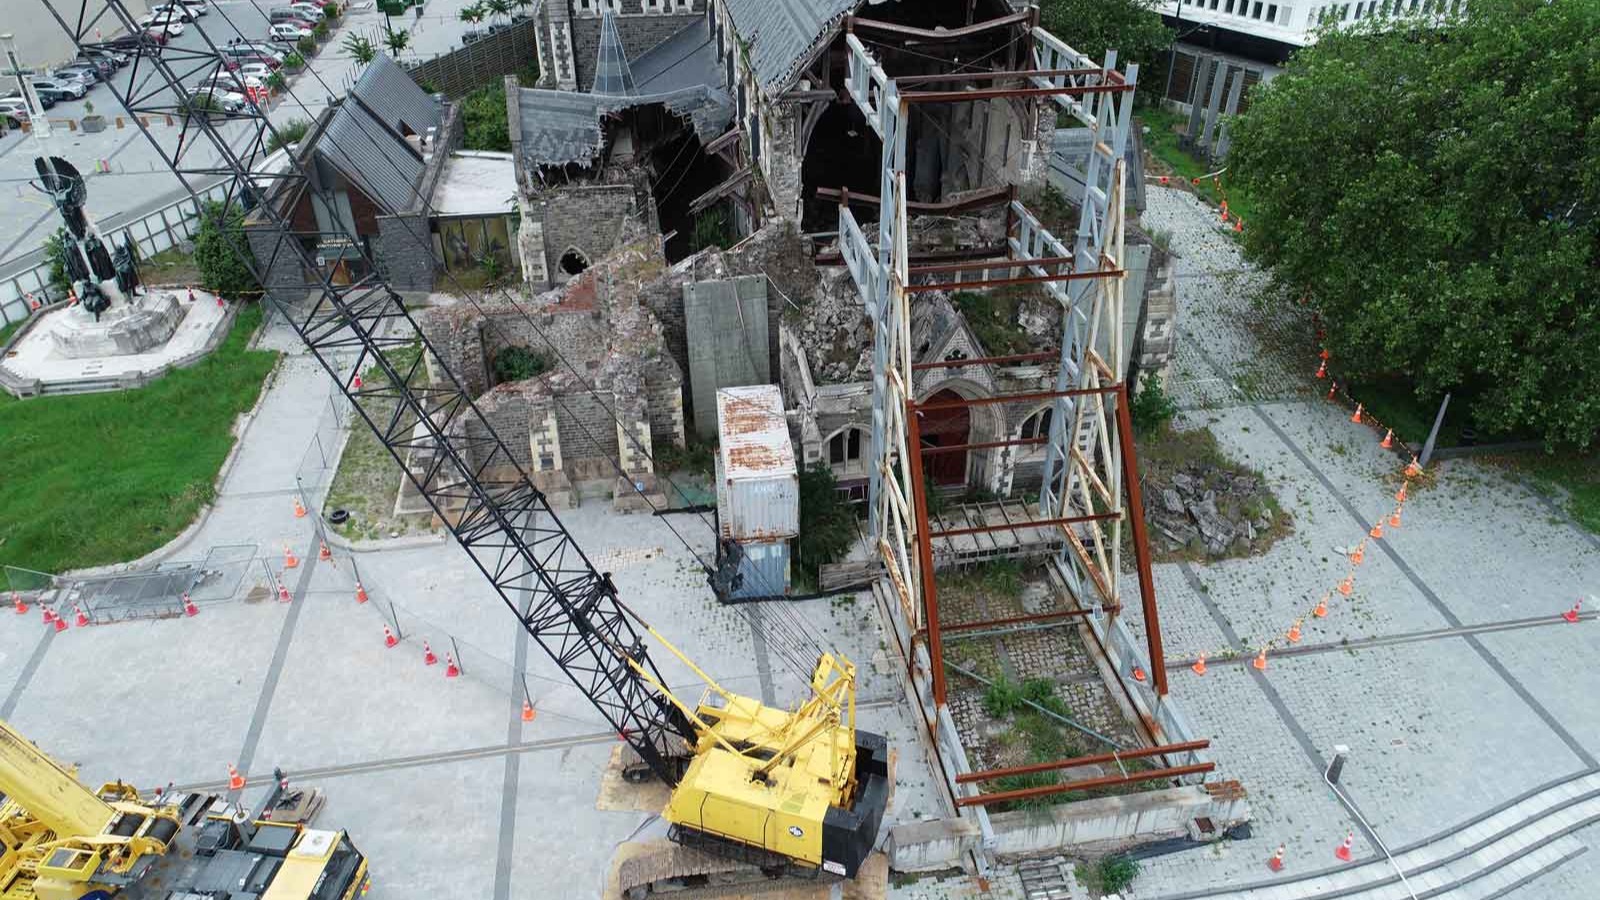 Drone photo of earthquake damage in Christchurch New Zealand